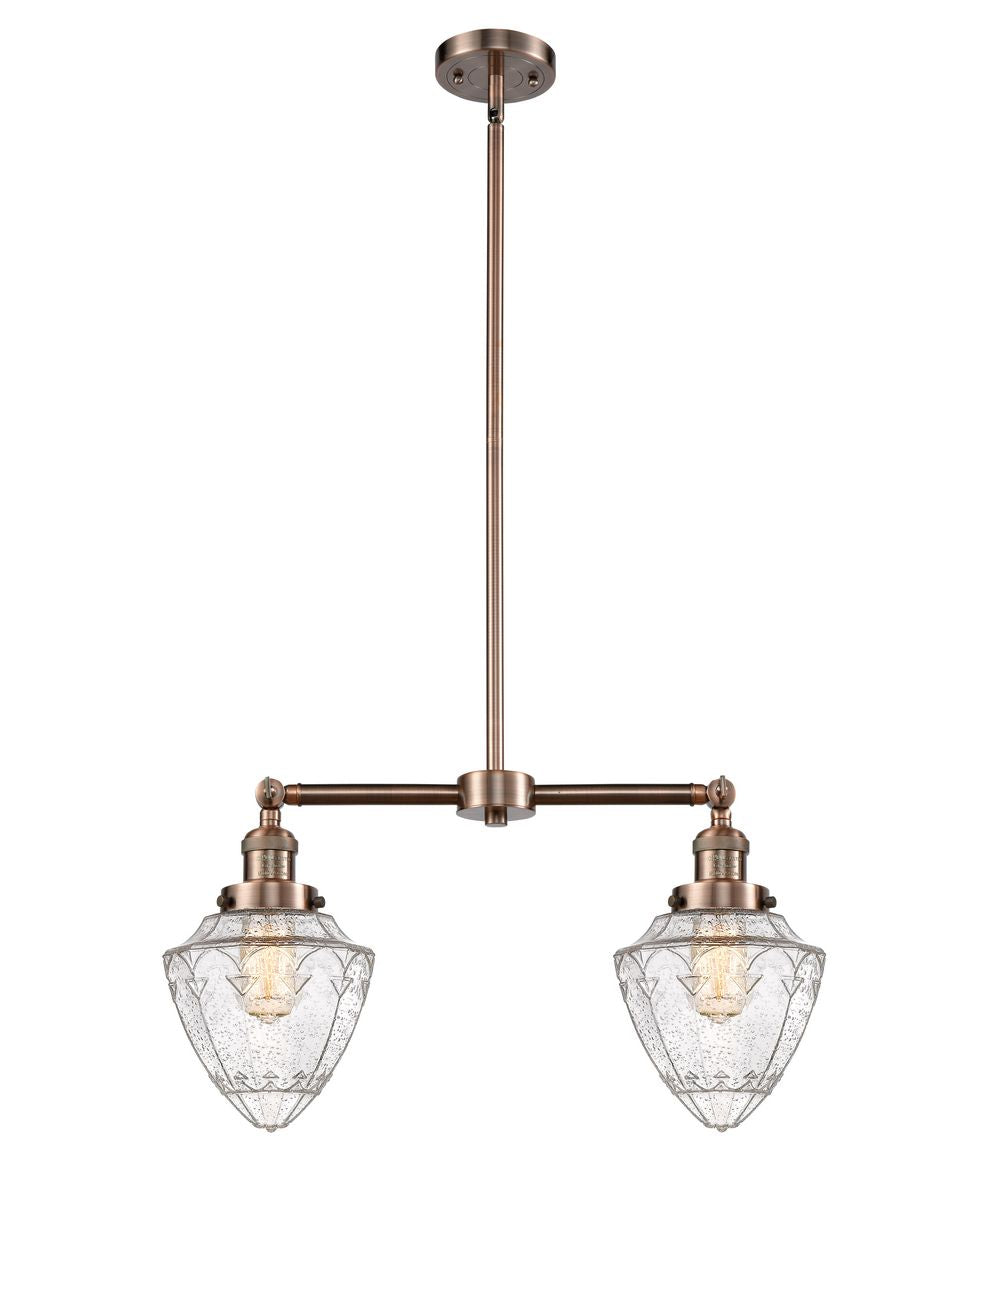 209-AC-G664-7 2-Light 24" Antique Copper Island Light - Seedy Small Bullet Glass - LED Bulb - Dimmensions: 24 x 7 x 15.25<br>Minimum Height : 24.25<br>Maximum Height : 48.25 - Sloped Ceiling Compatible: Yes